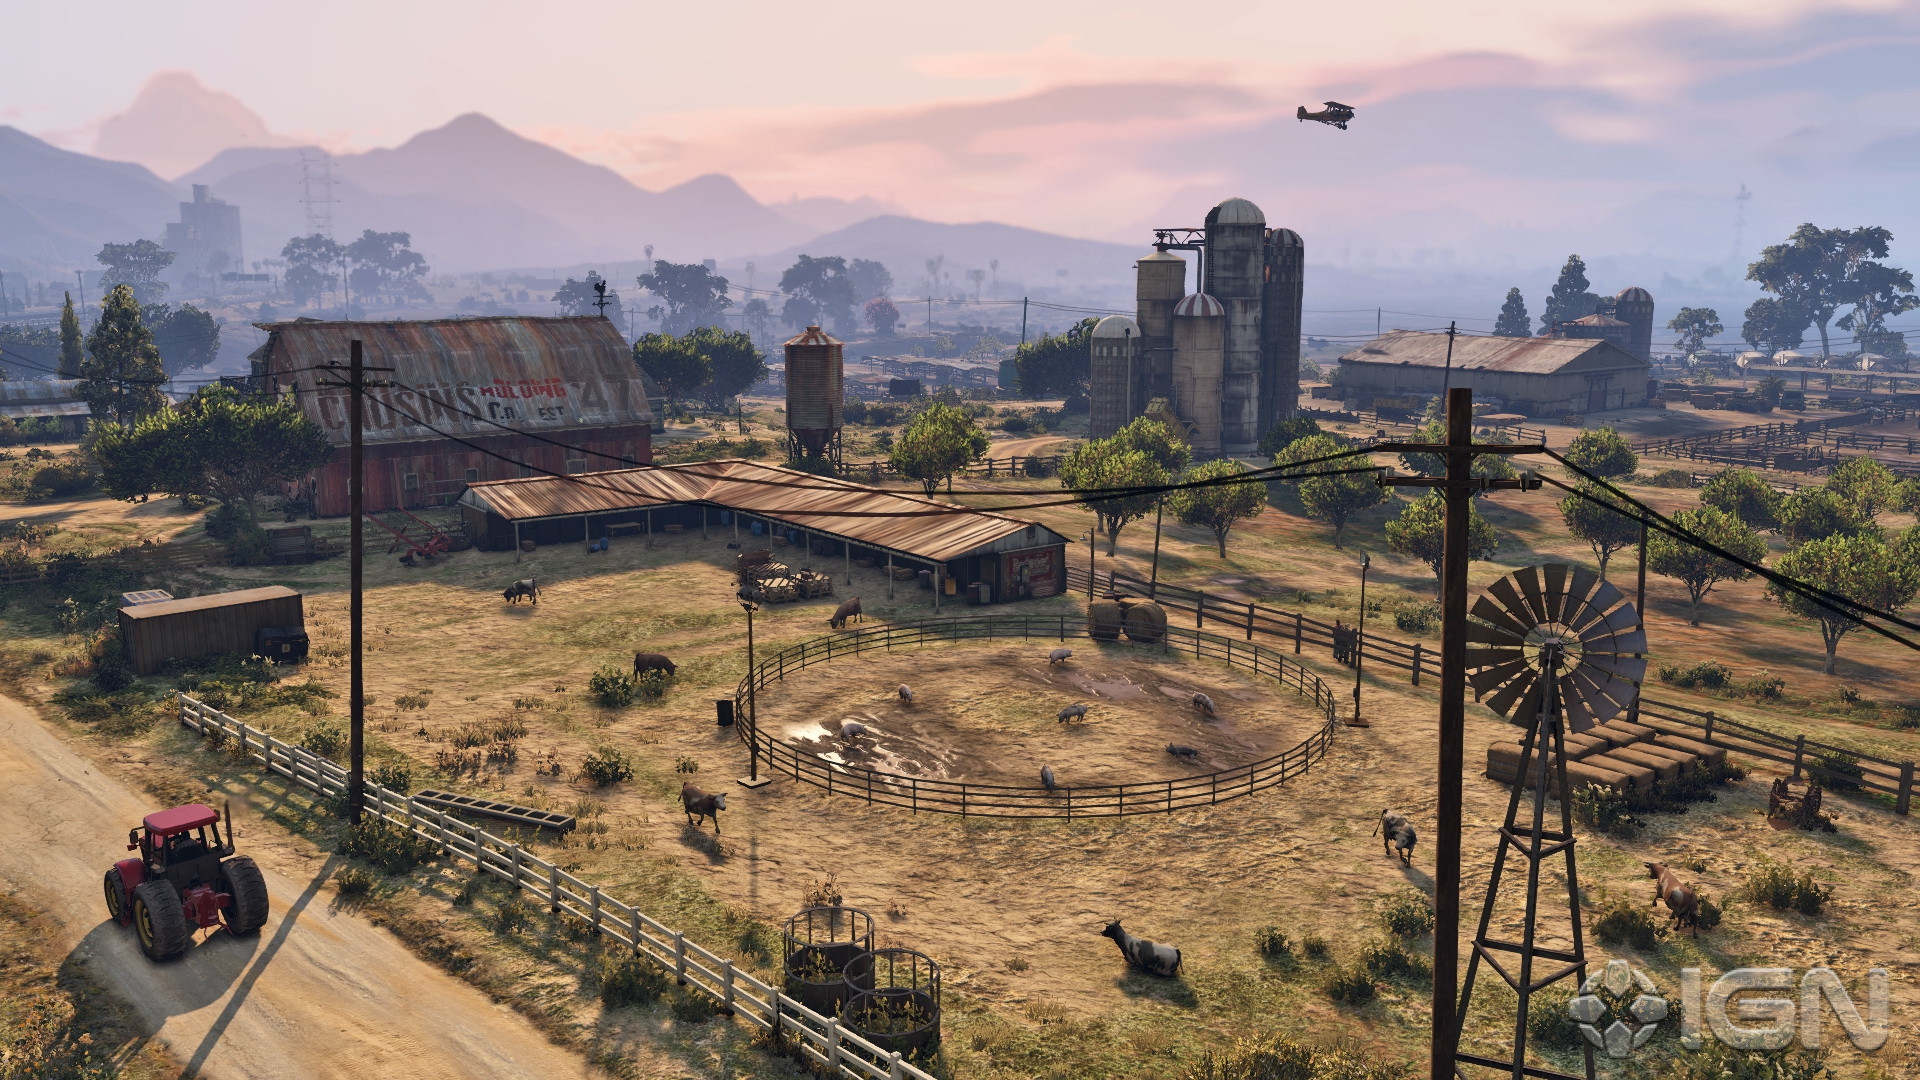 The GTA Place - GTA V PS4 and Xbox One Screenshots